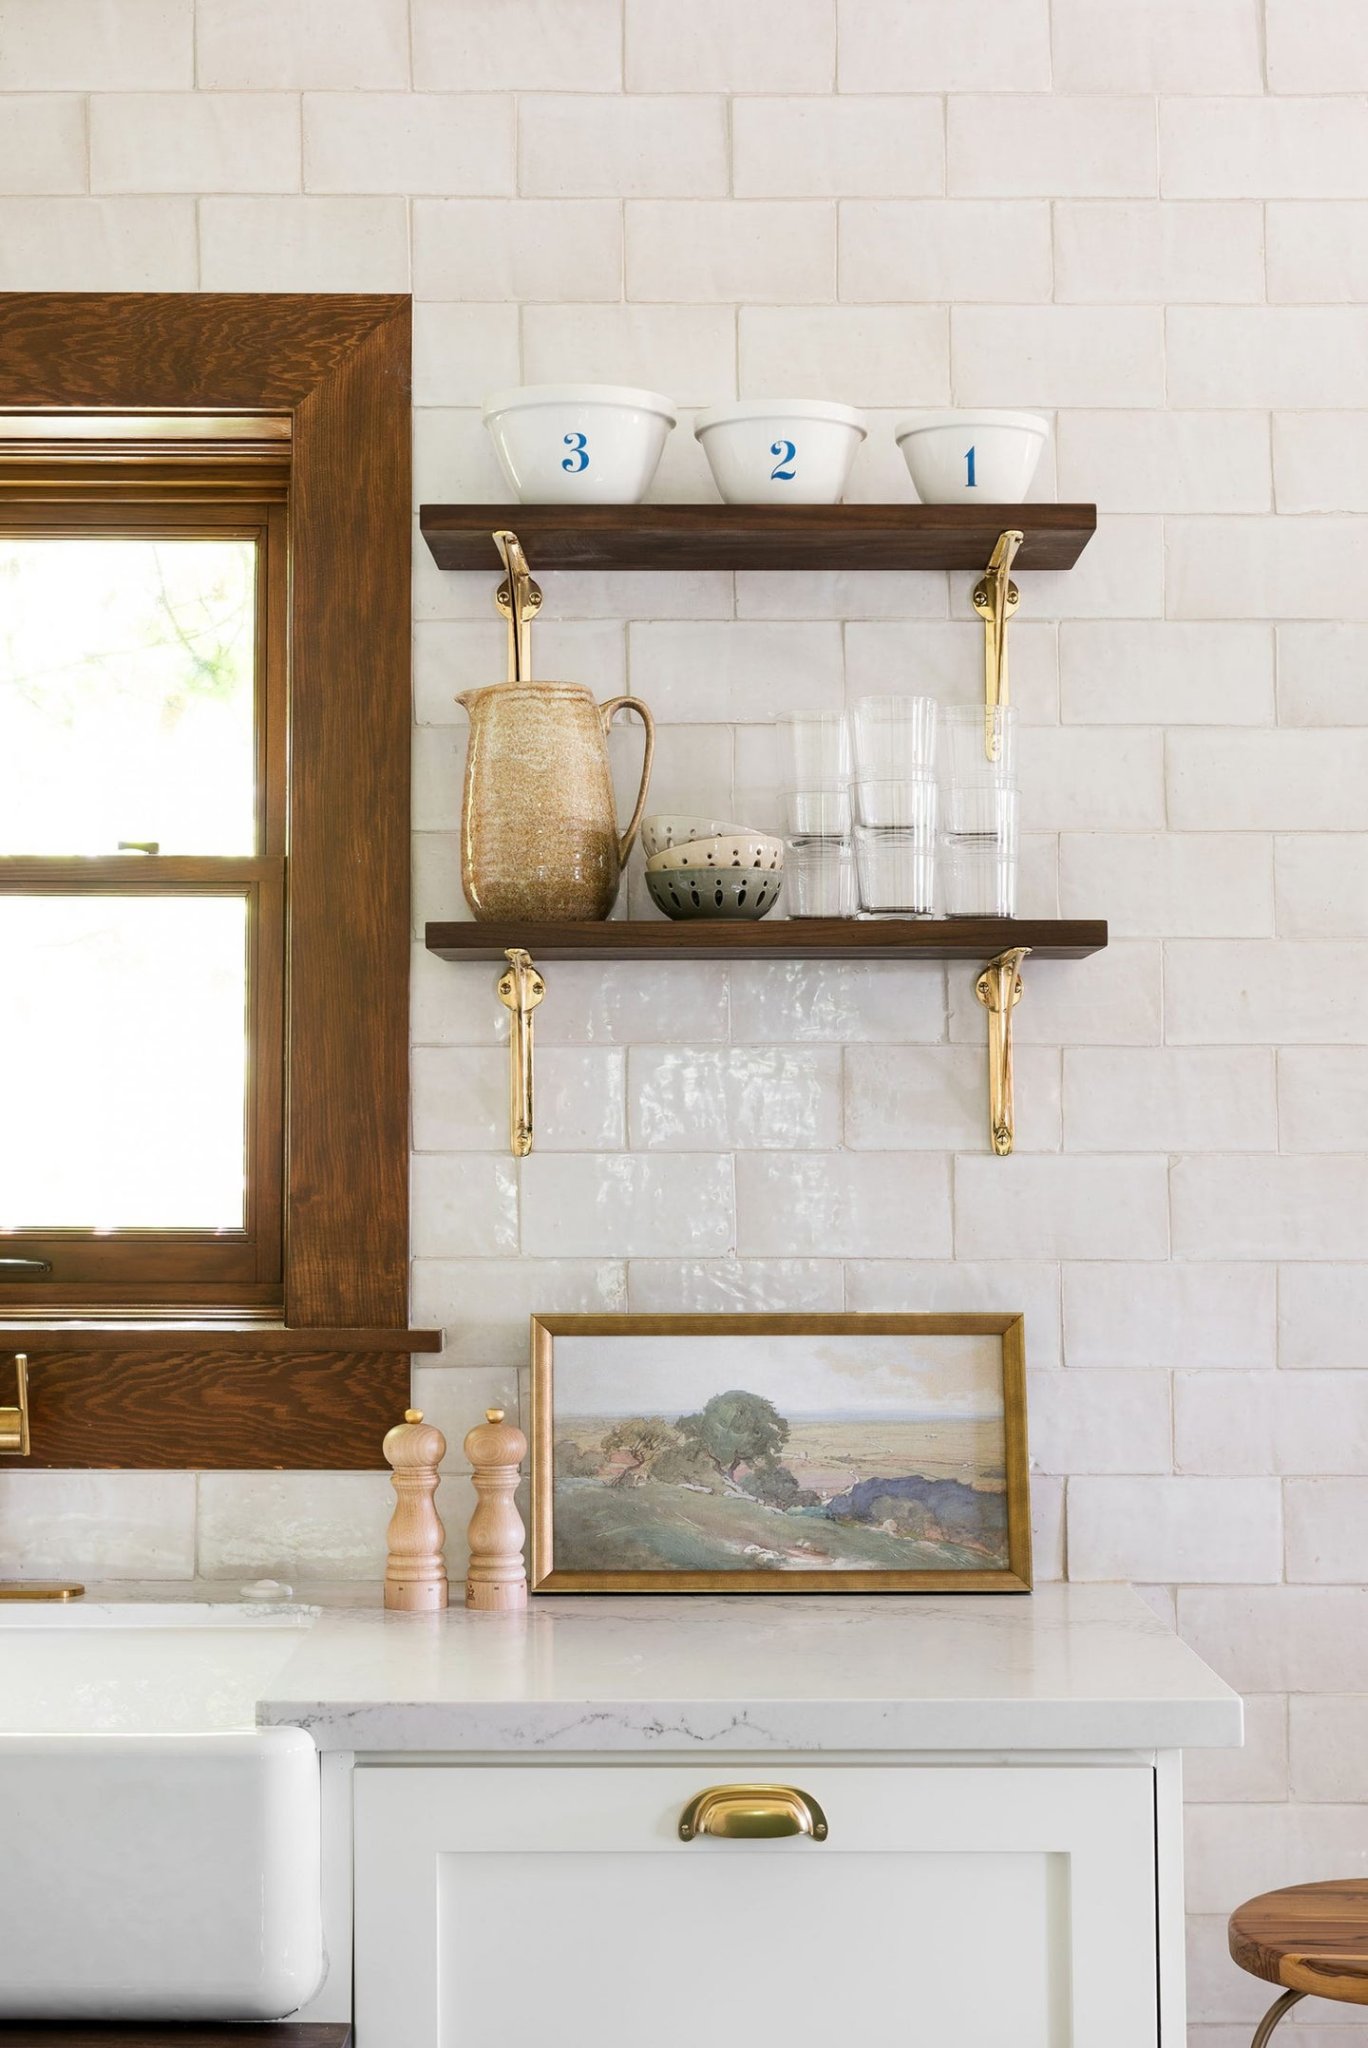 The New Way Everyone Will Be Using Carrara Marble, According to One Reno Expert